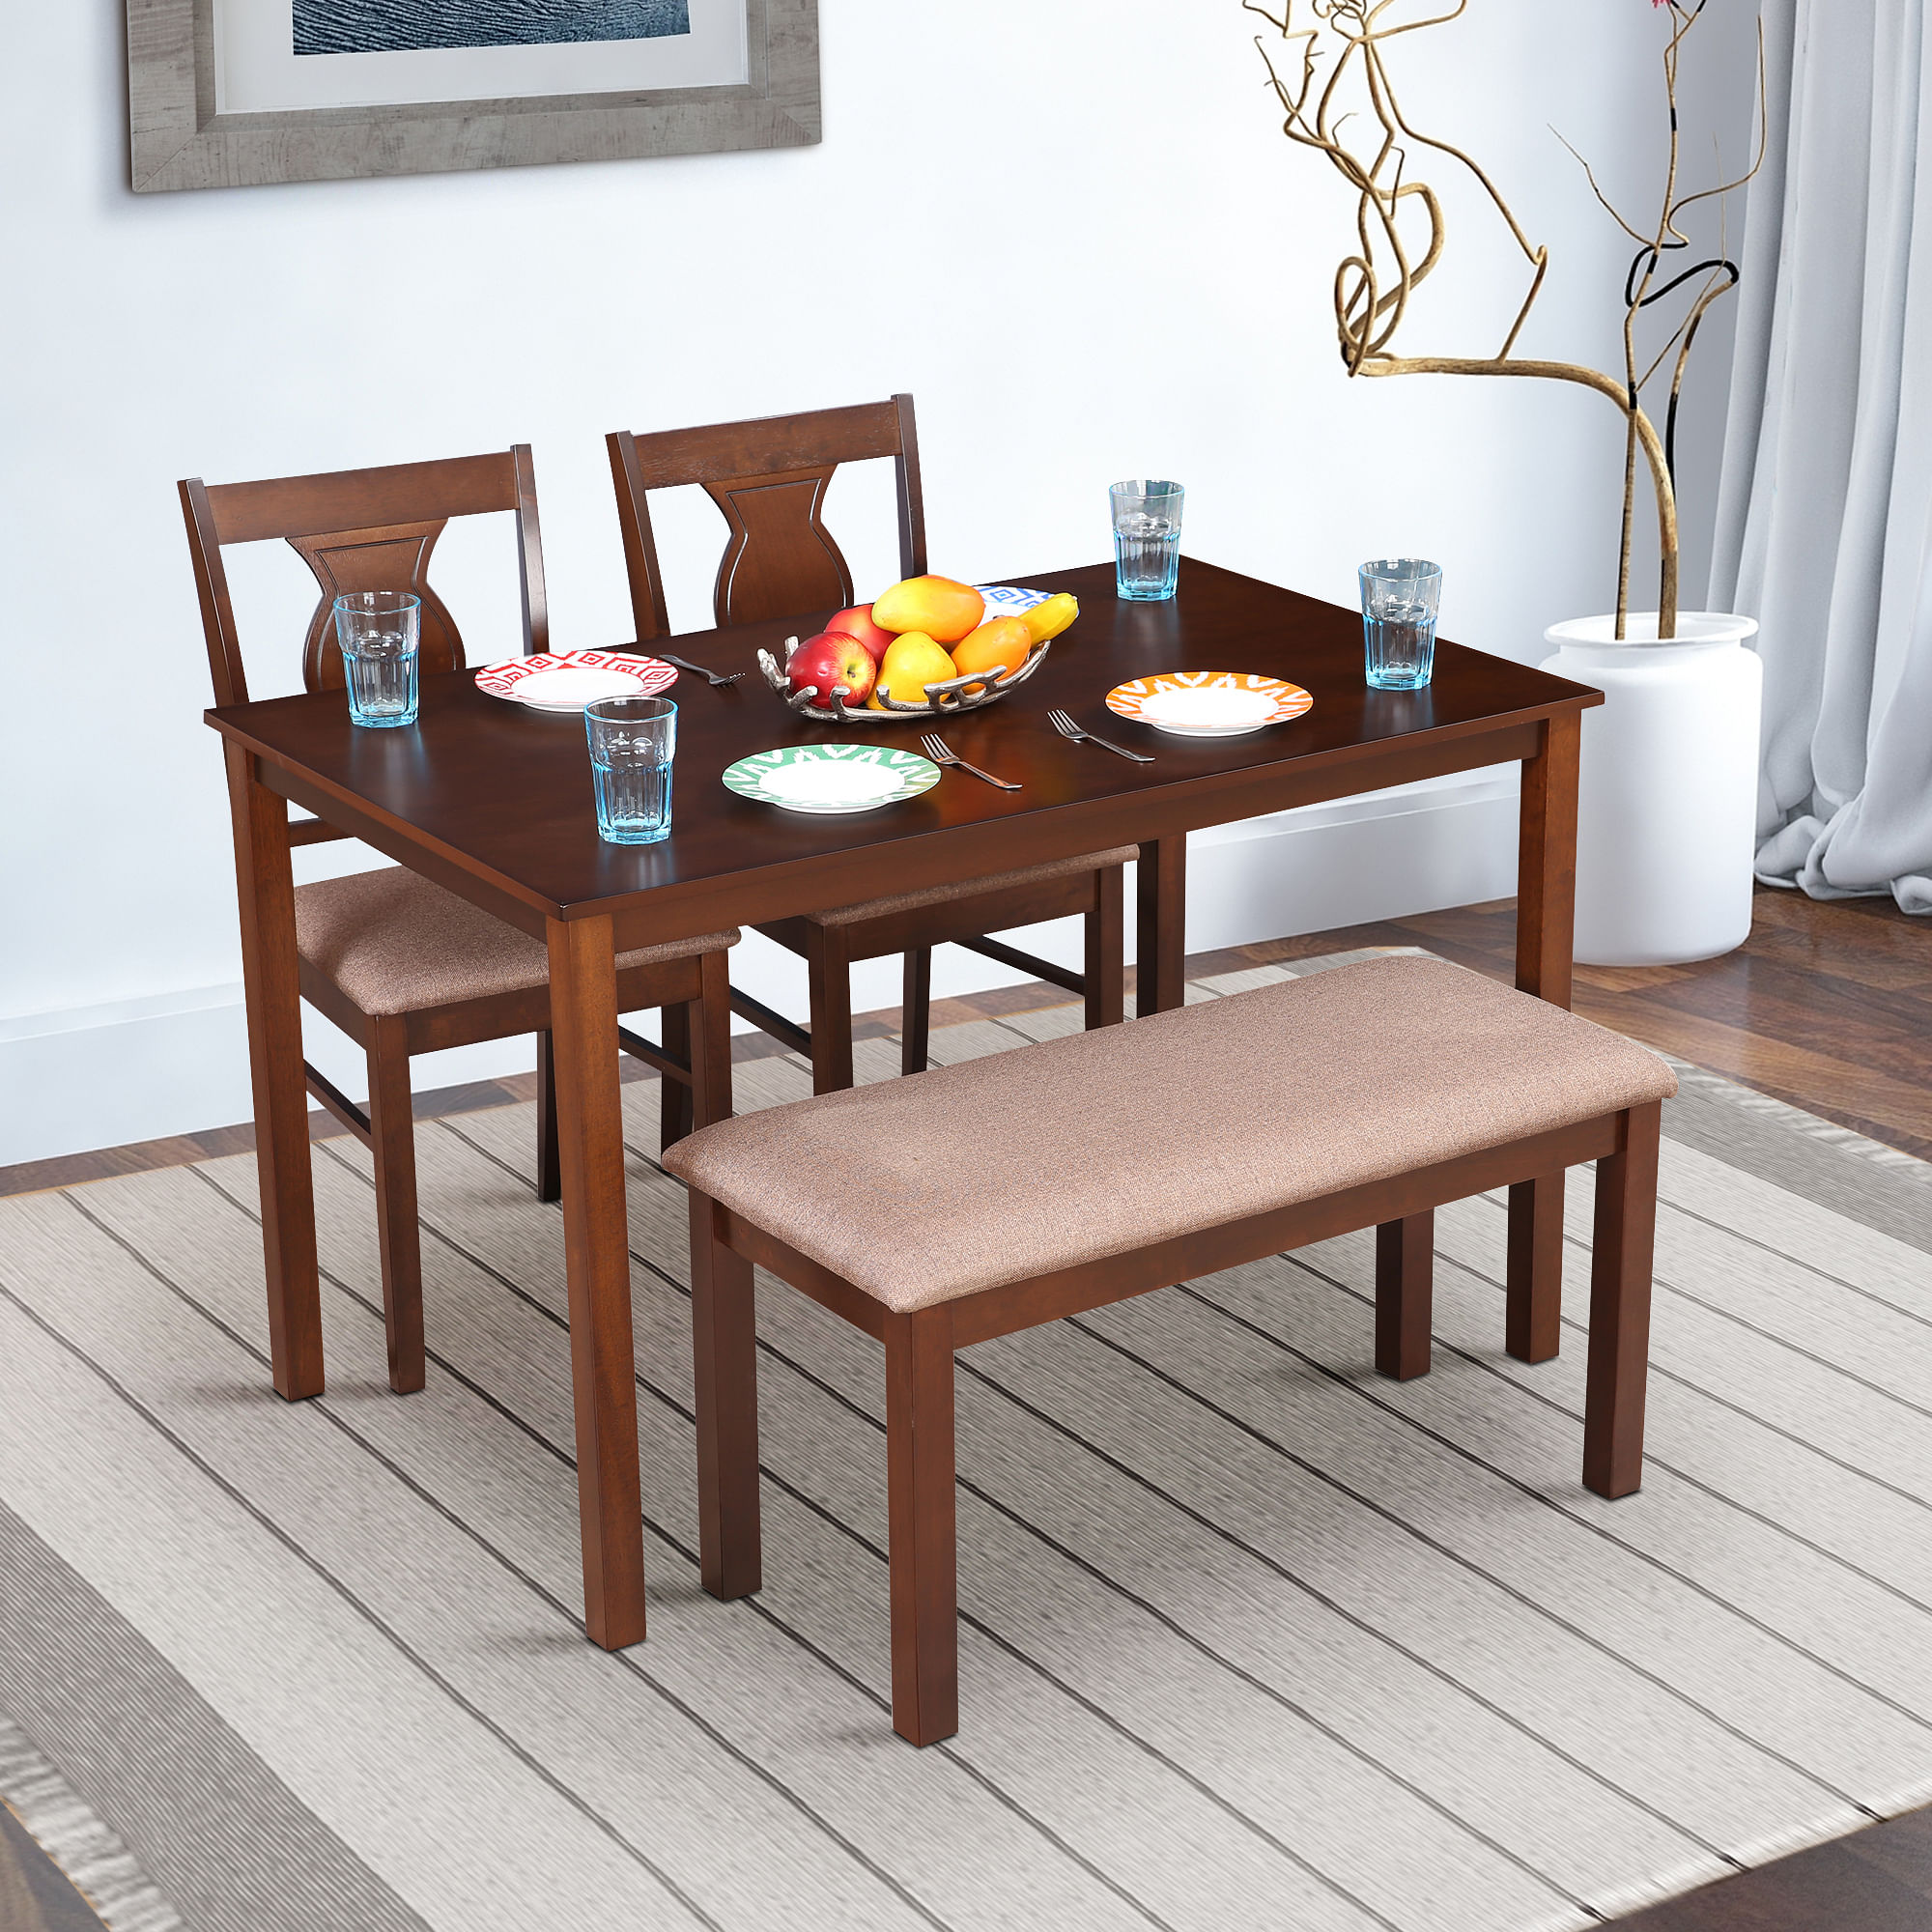 Artois Solidwood 4 Seater Dining Set in Antique Cherry Colour